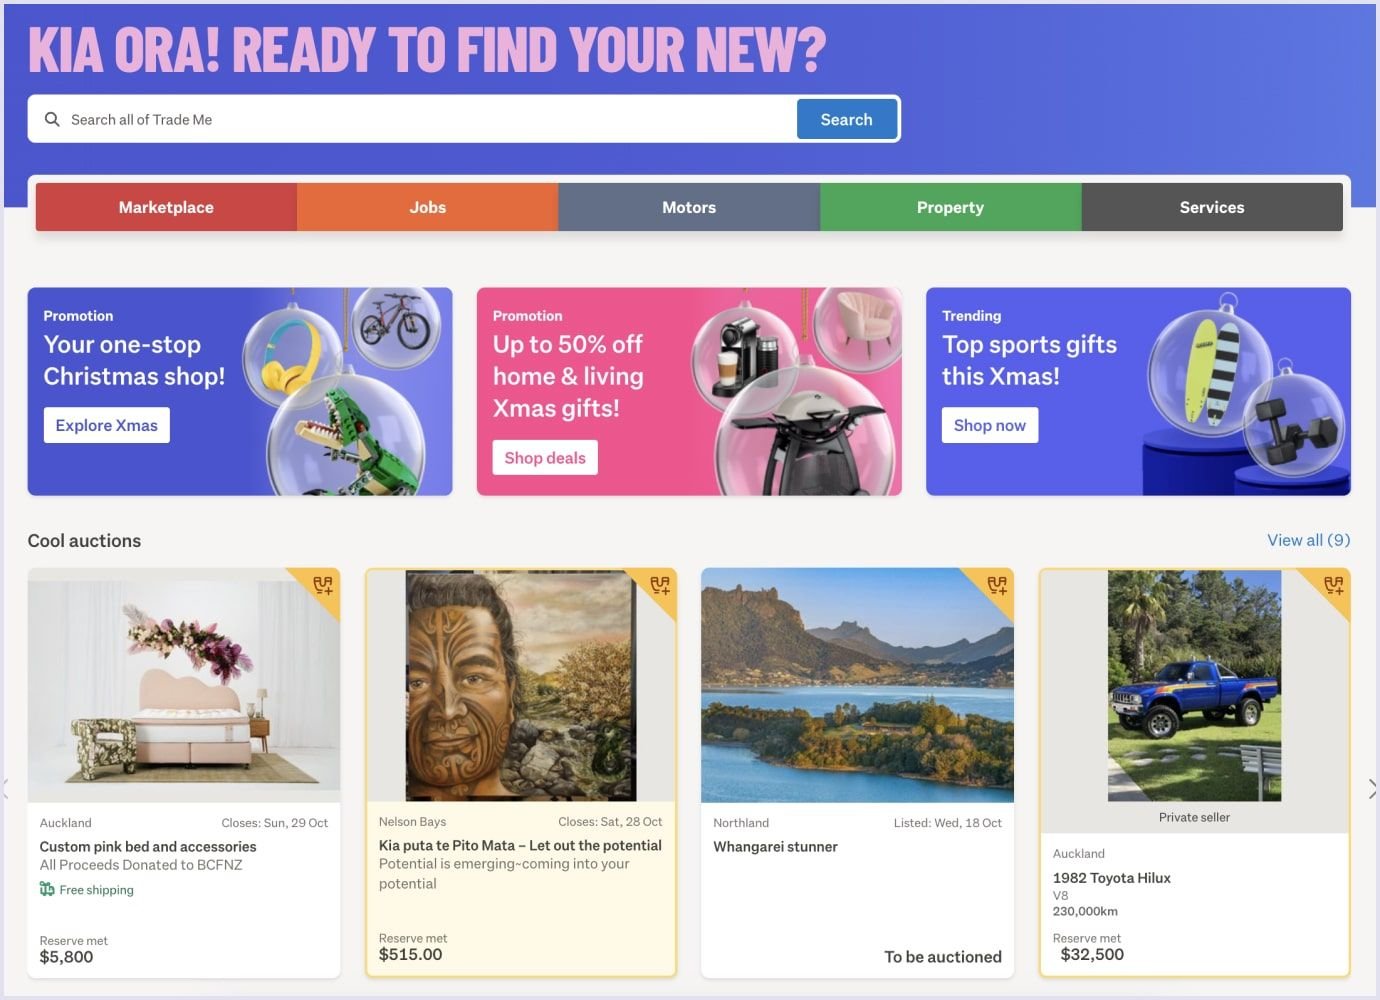 Home of the TradeMe marketplace